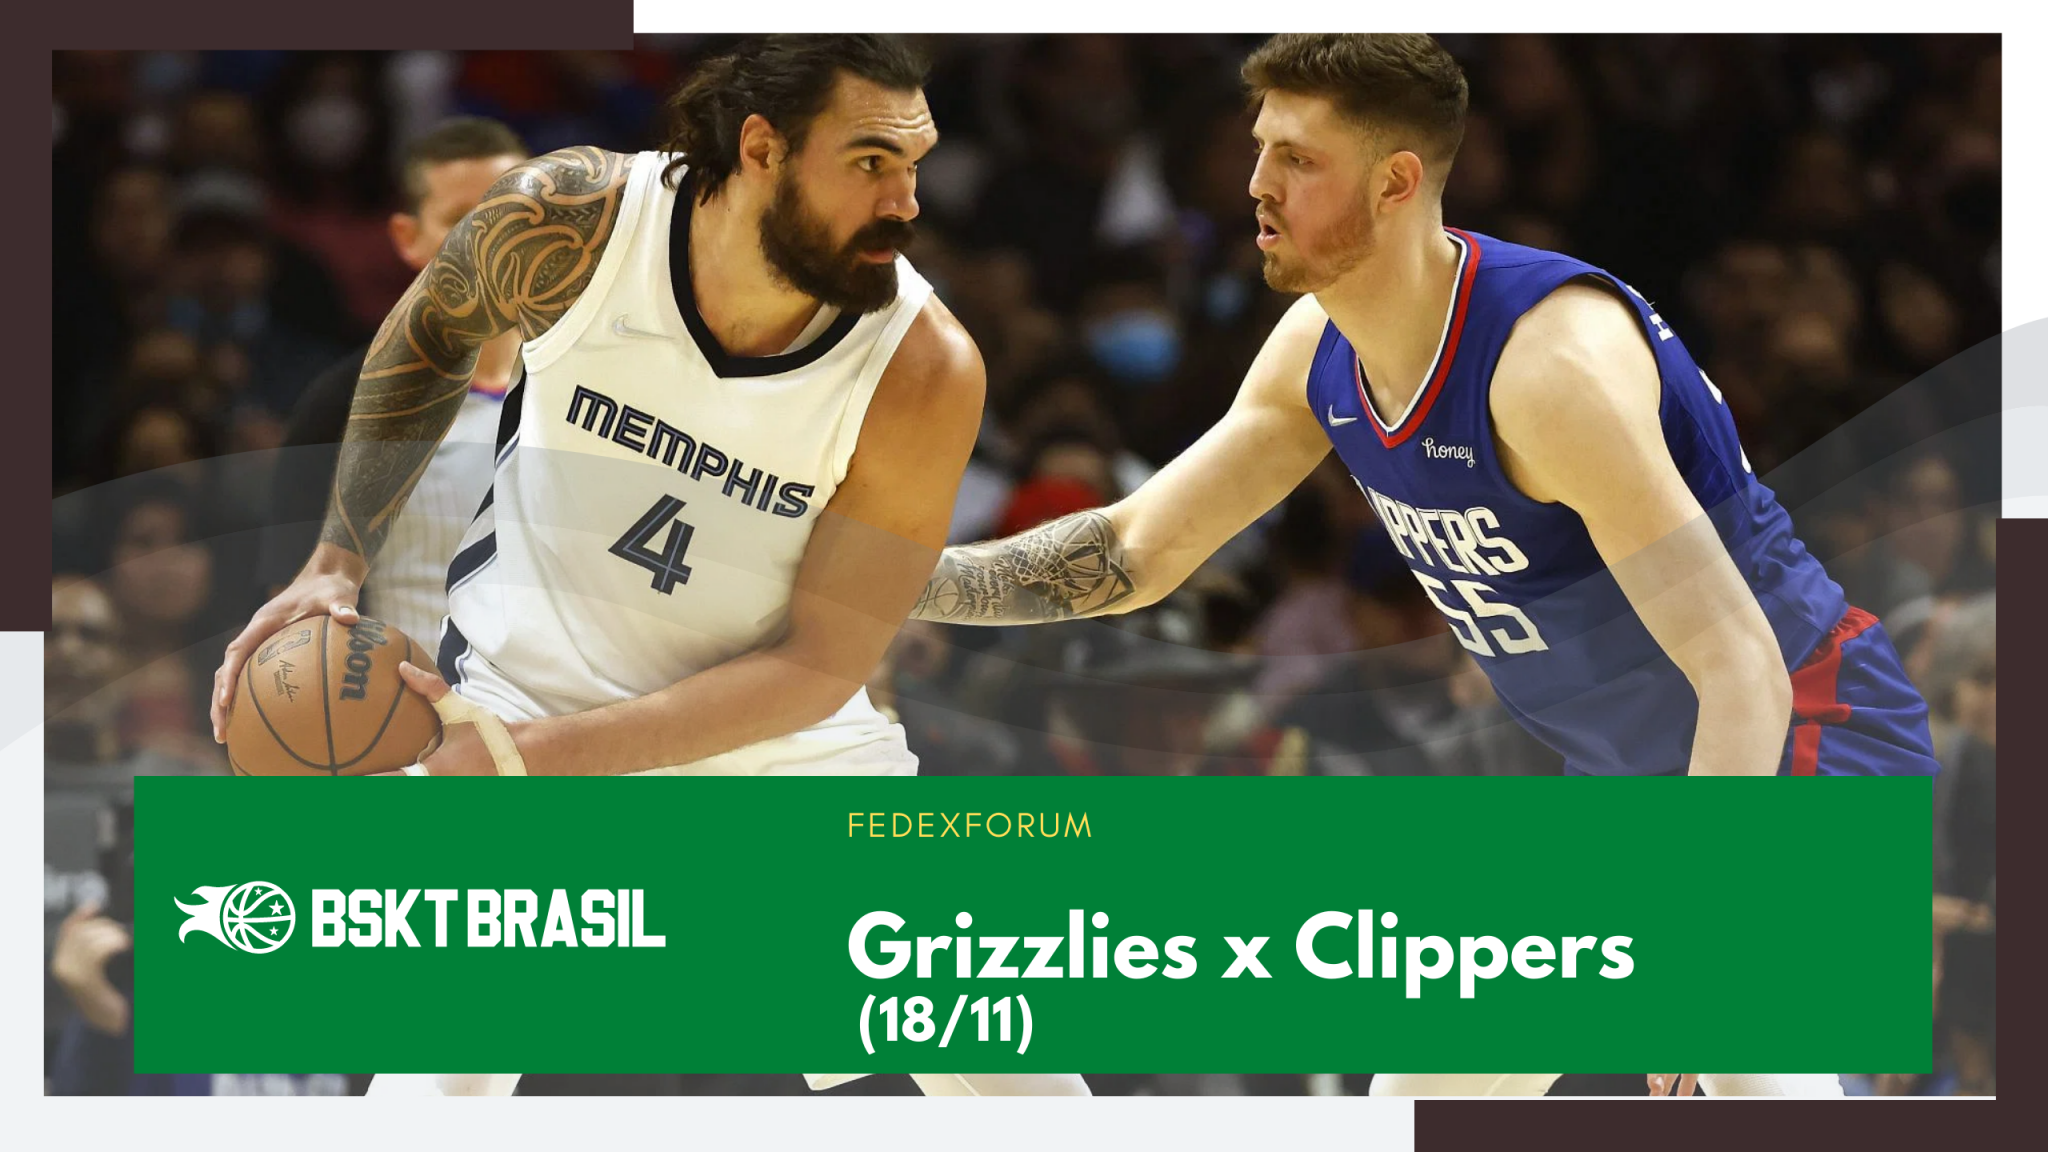 Grizzlies x Clippers - 18/11